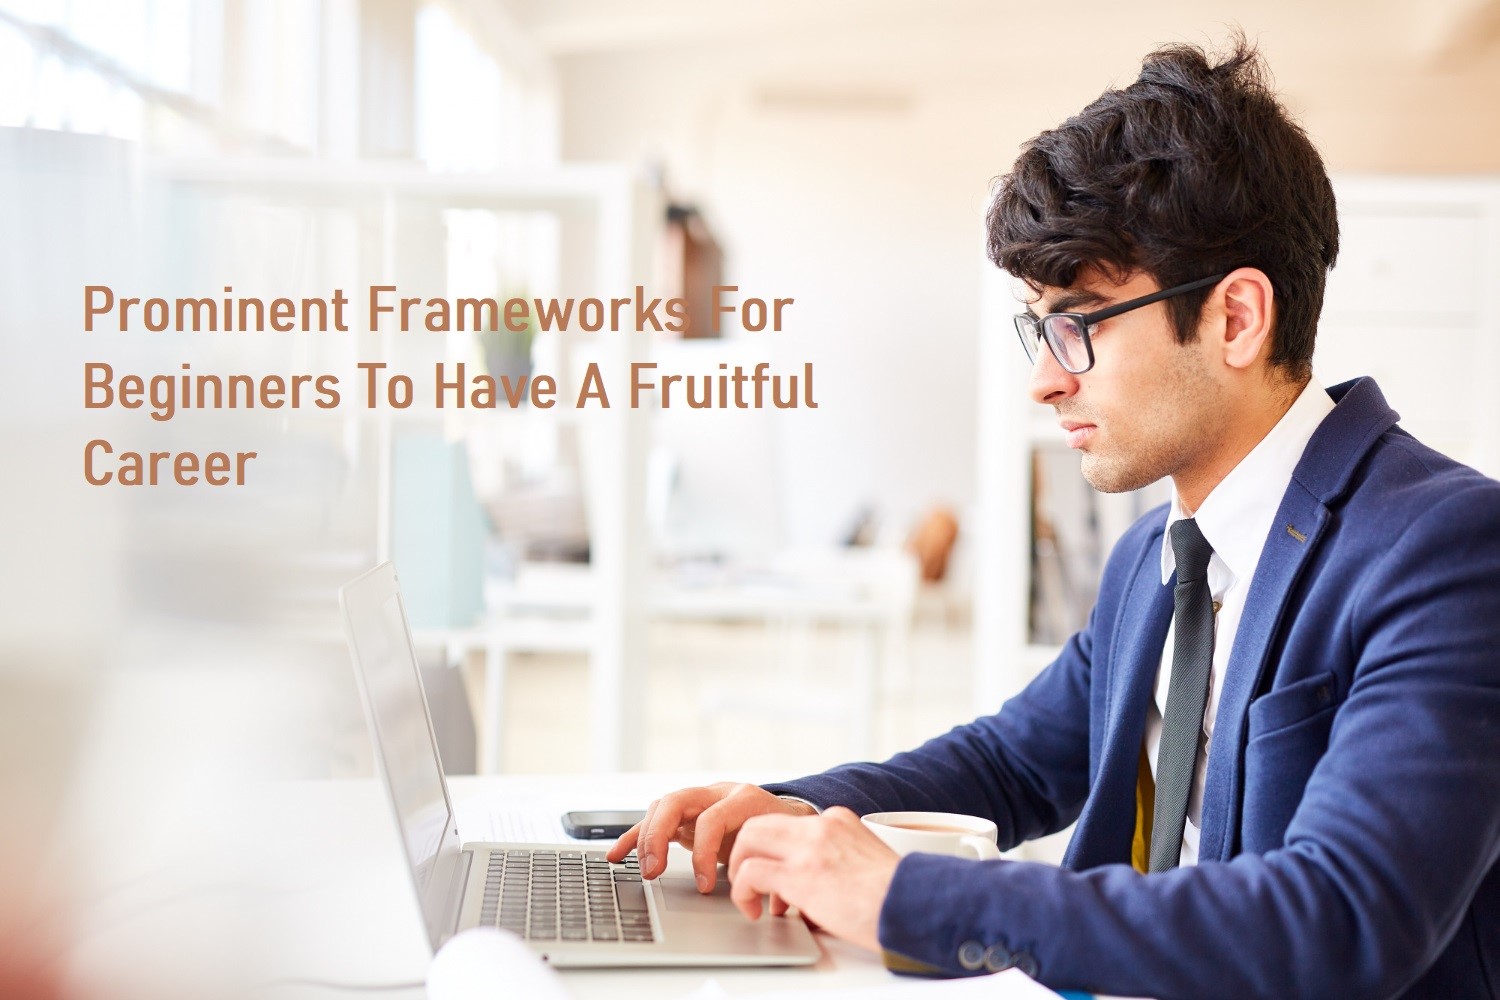 Prominent Frameworks for Beginners to Have a Fruitful Career